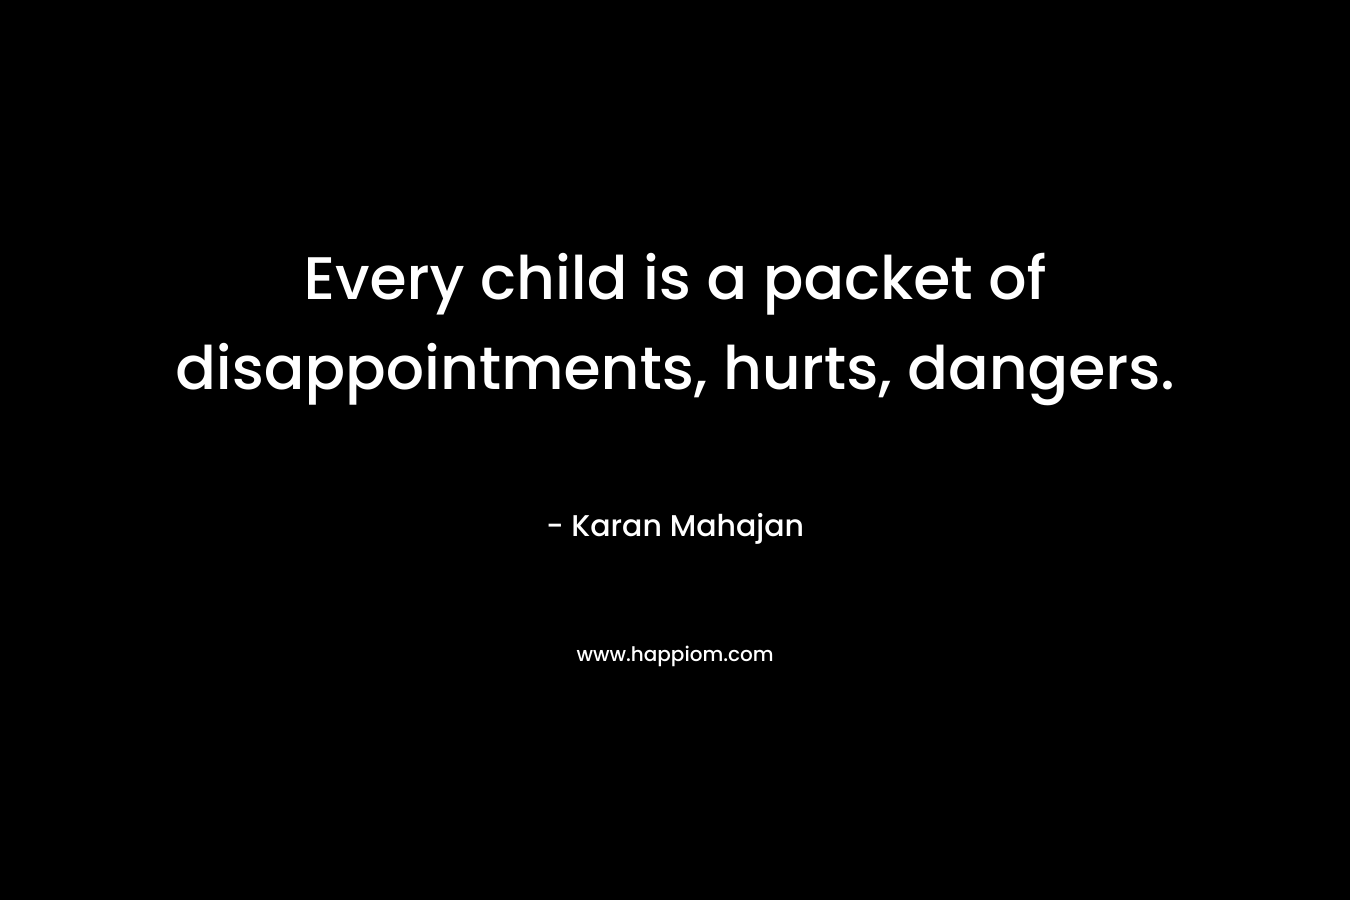 Every child is a packet of disappointments, hurts, dangers.